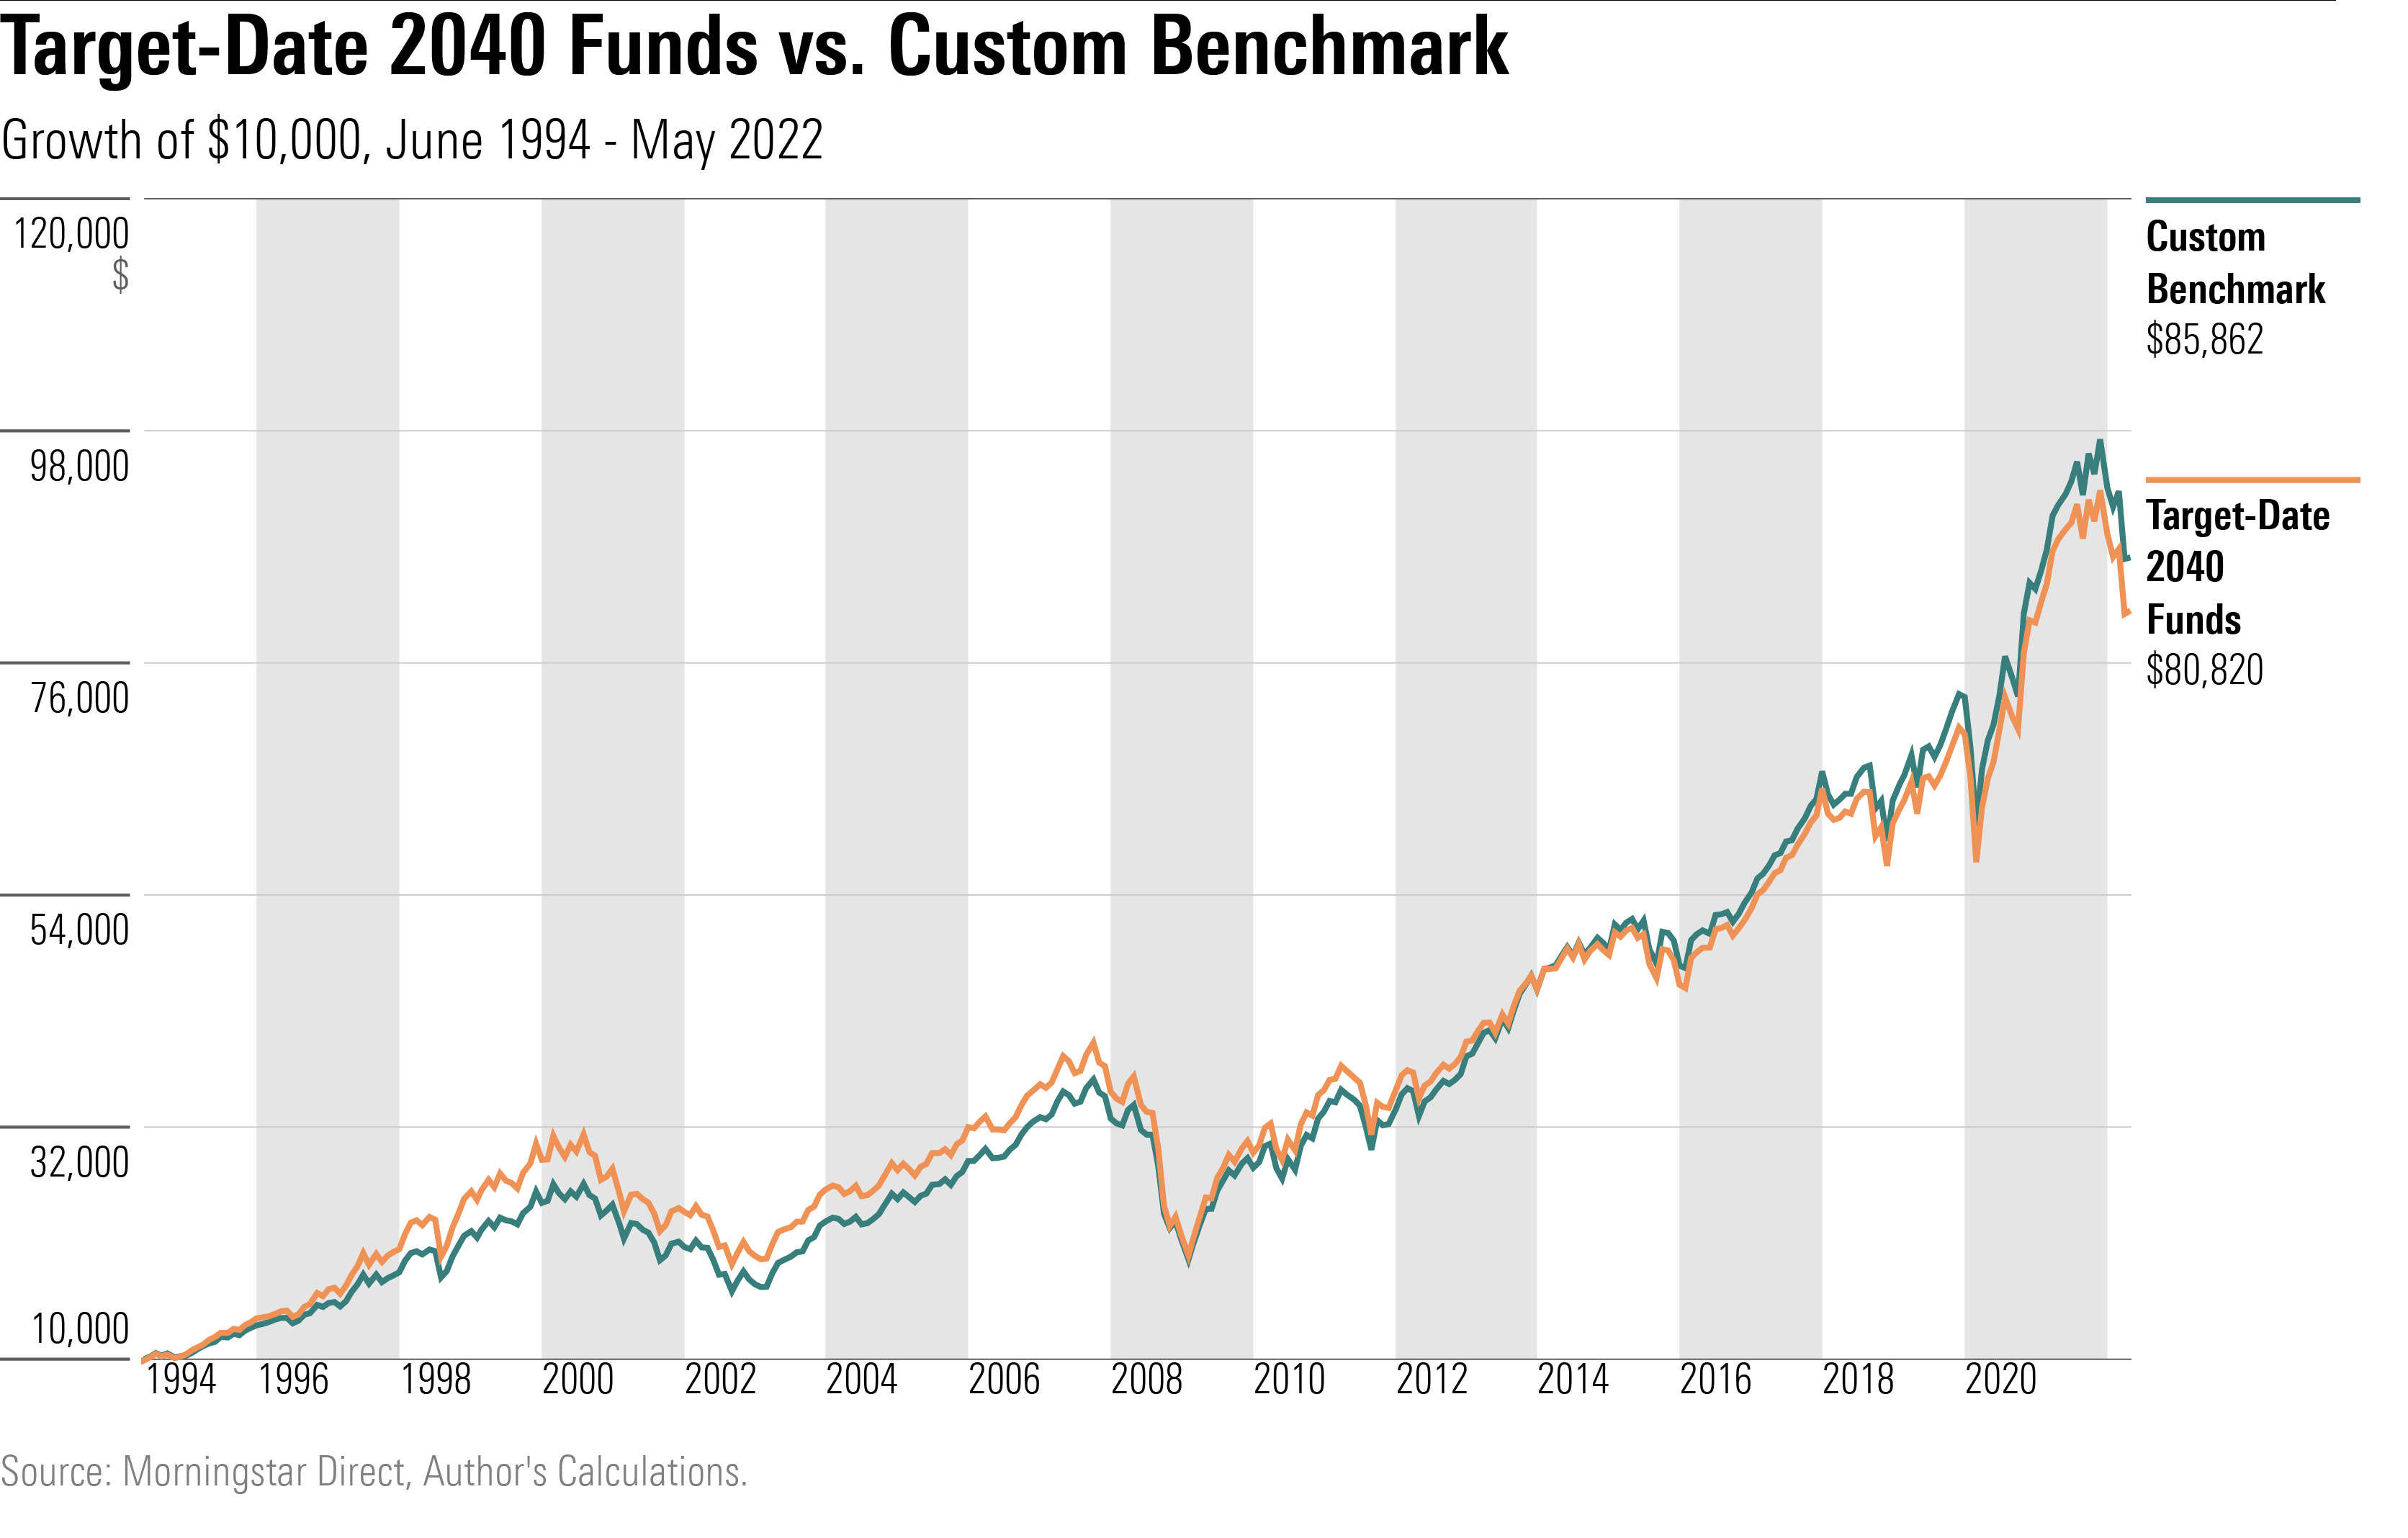 The performance of target-date 2040 funds vs. a custom benchmark, over their histories.